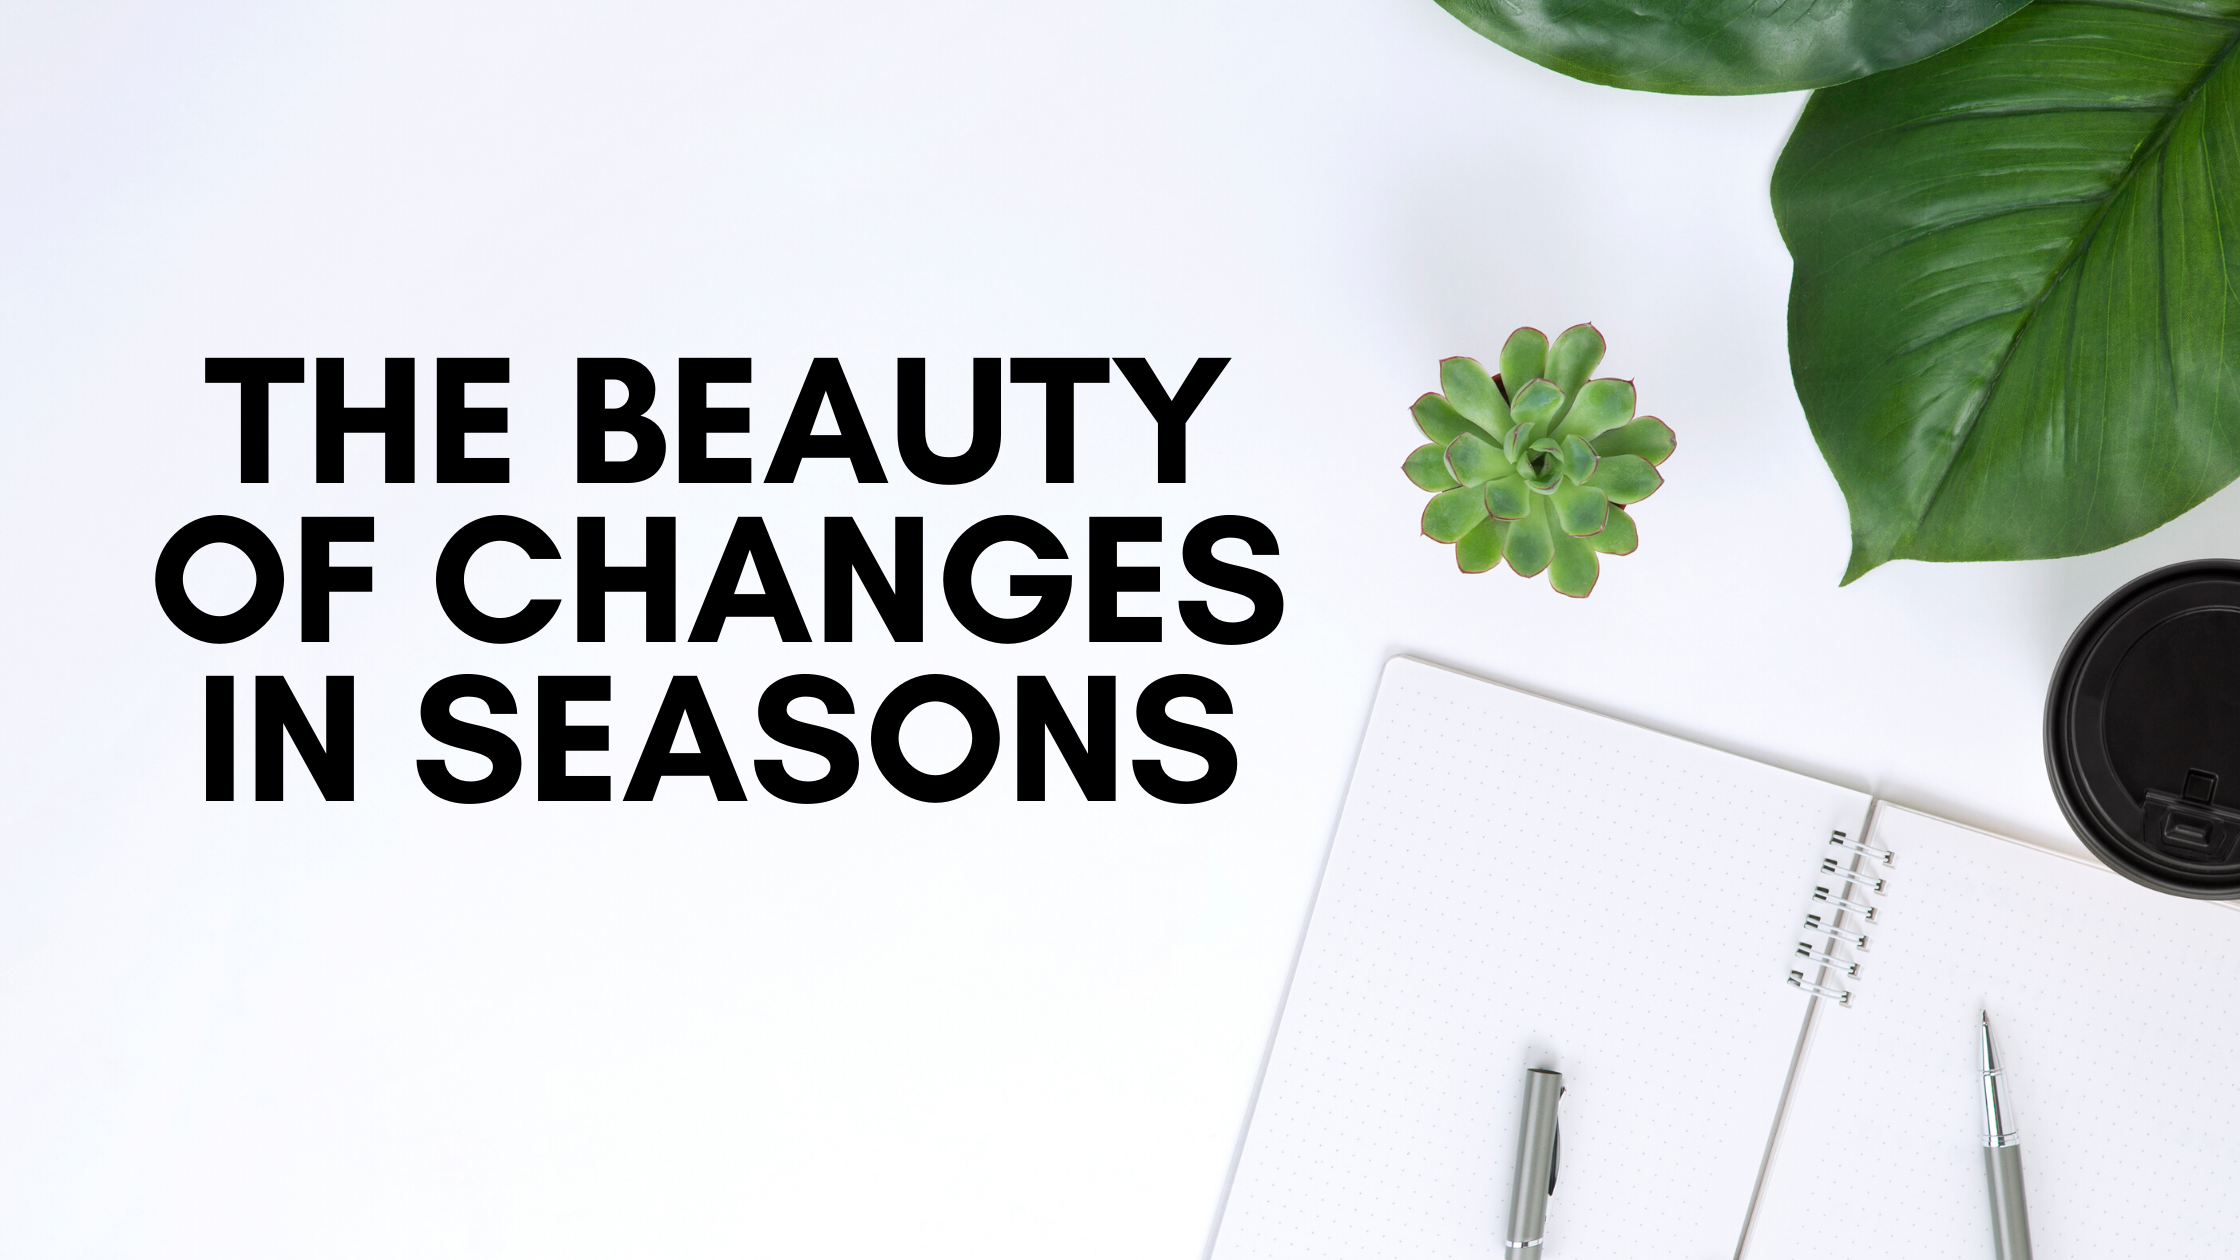 The beauty of changes in seasons